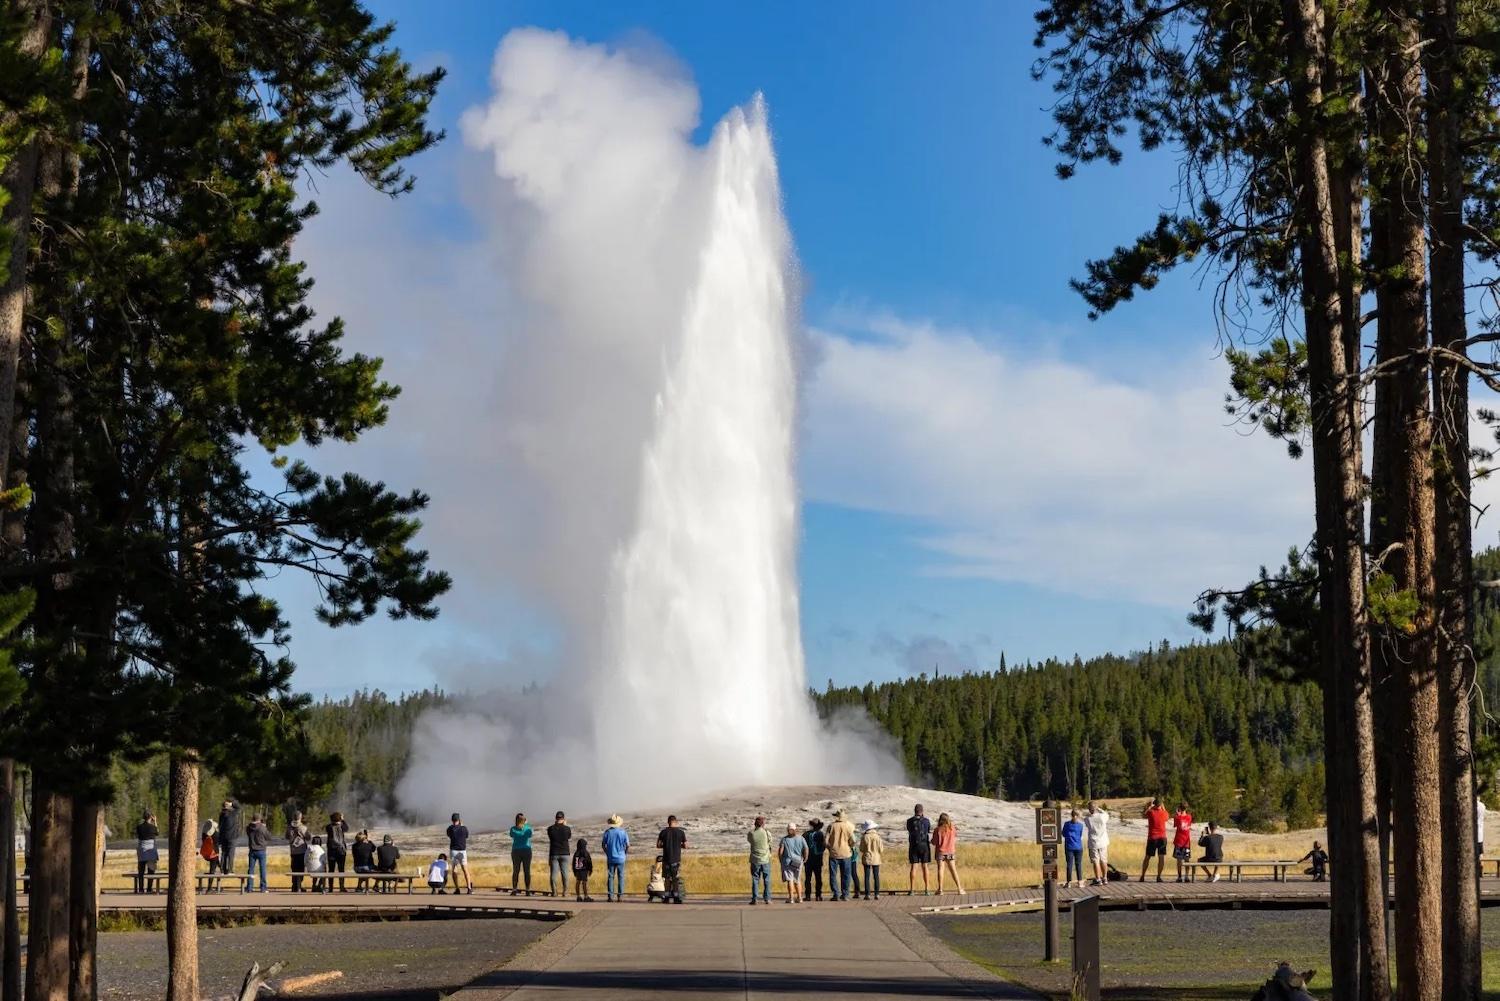 The Old Faithful geyser rockets up once again while a small crowd looks on in August 2022. (National Park Service/ Jacob W. Frank)